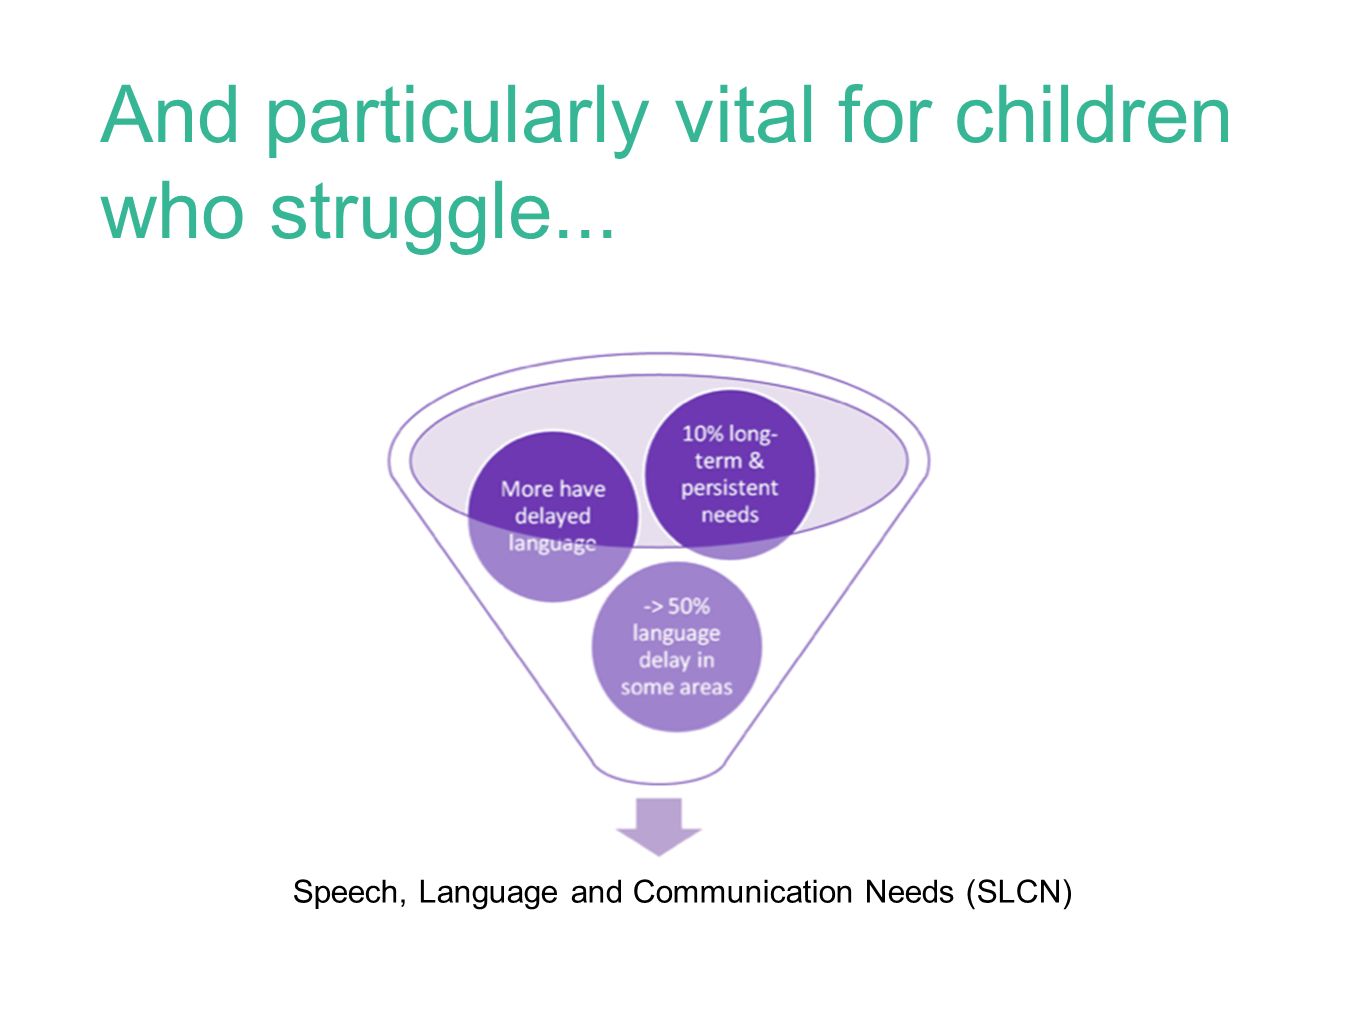 And particularly vital for children who struggle... Speech, Language and Communication Needs (SLCN)